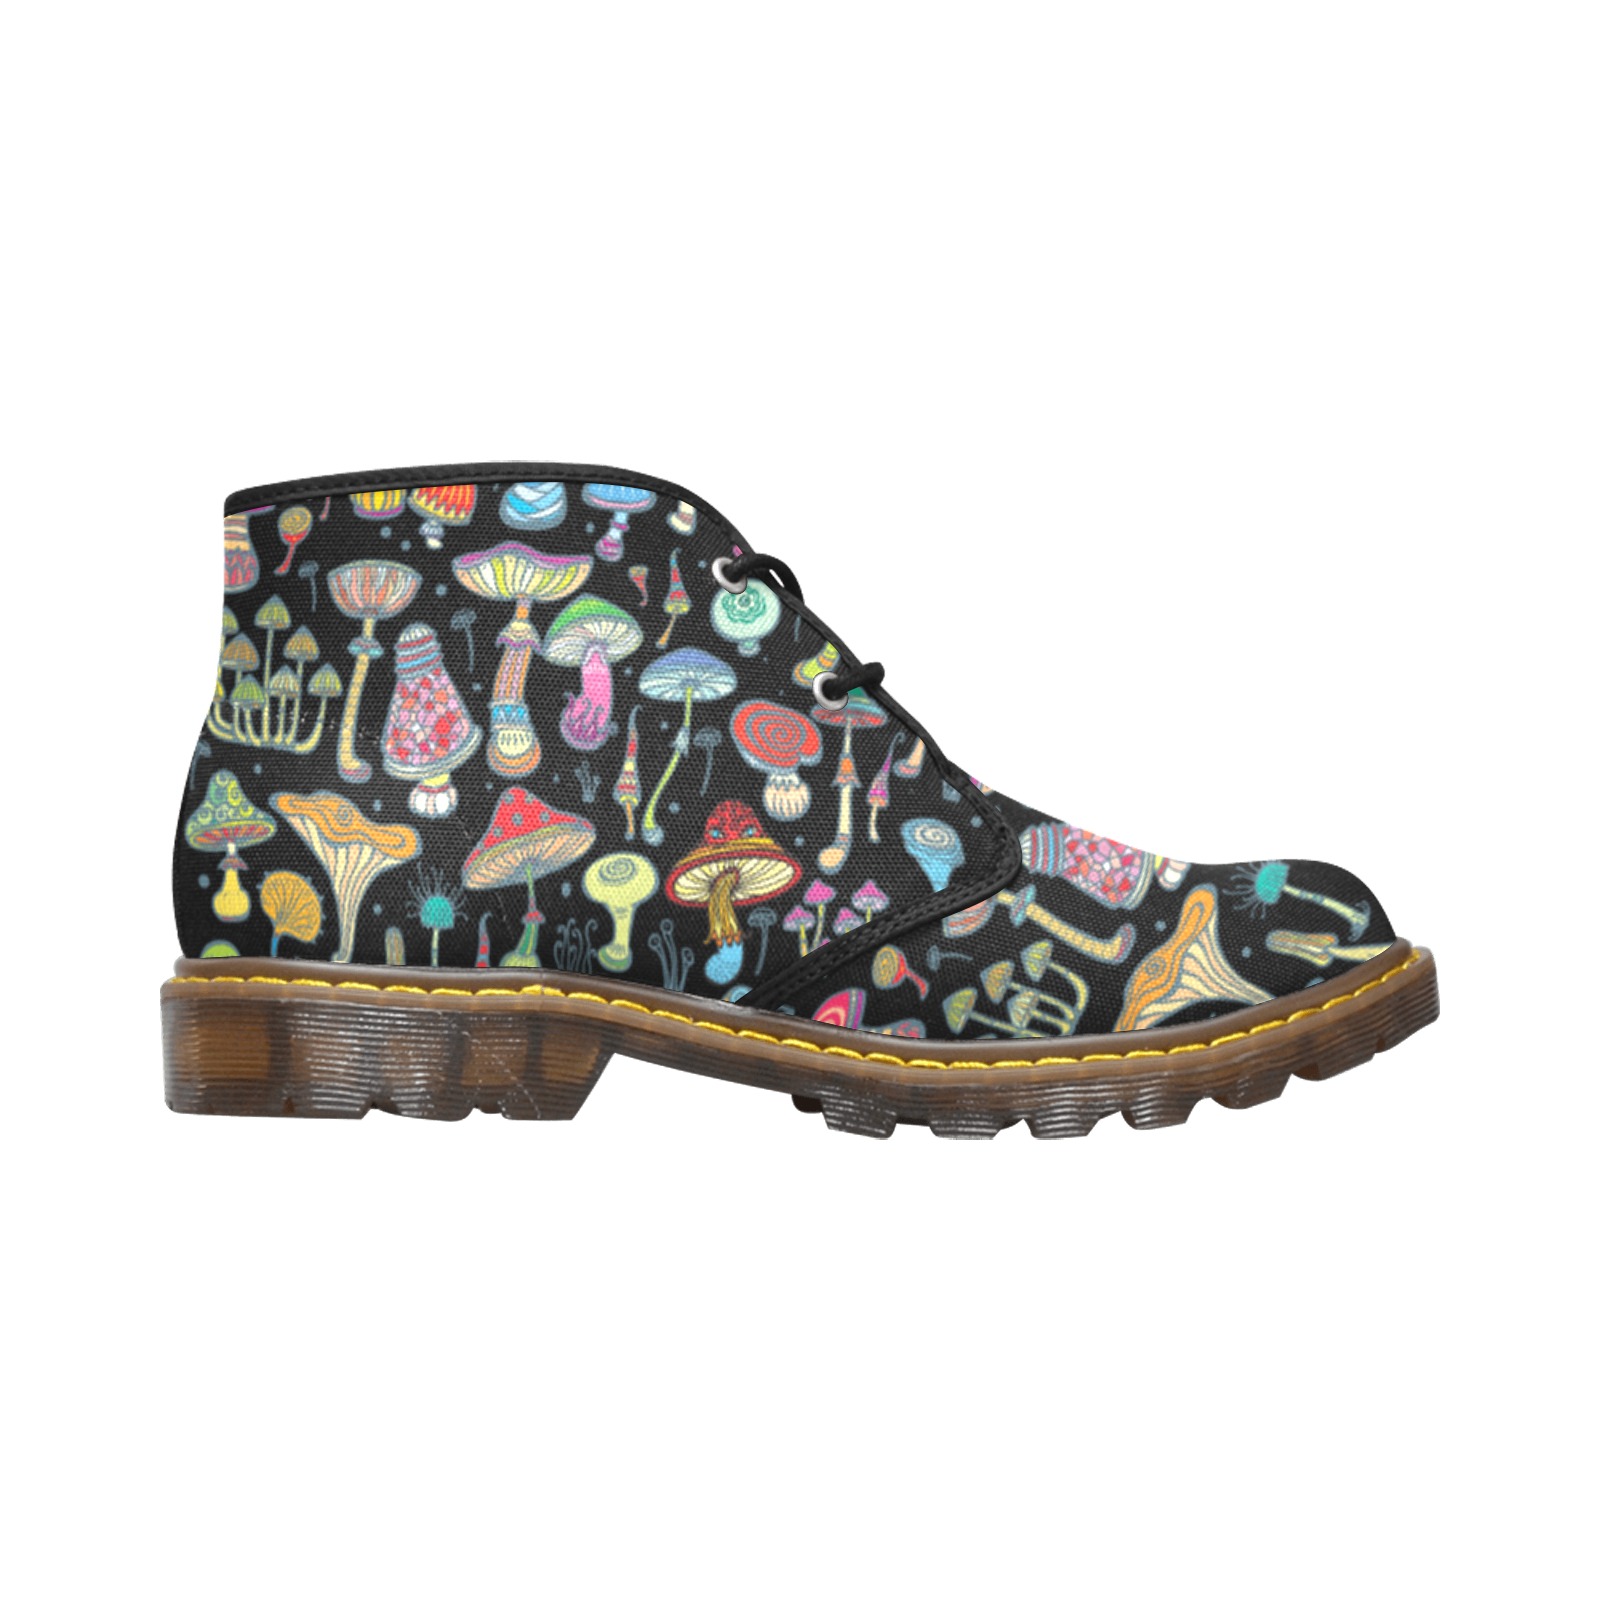 Shroomed Out Men's Canvas Chukka Boots (Model 2402-1)